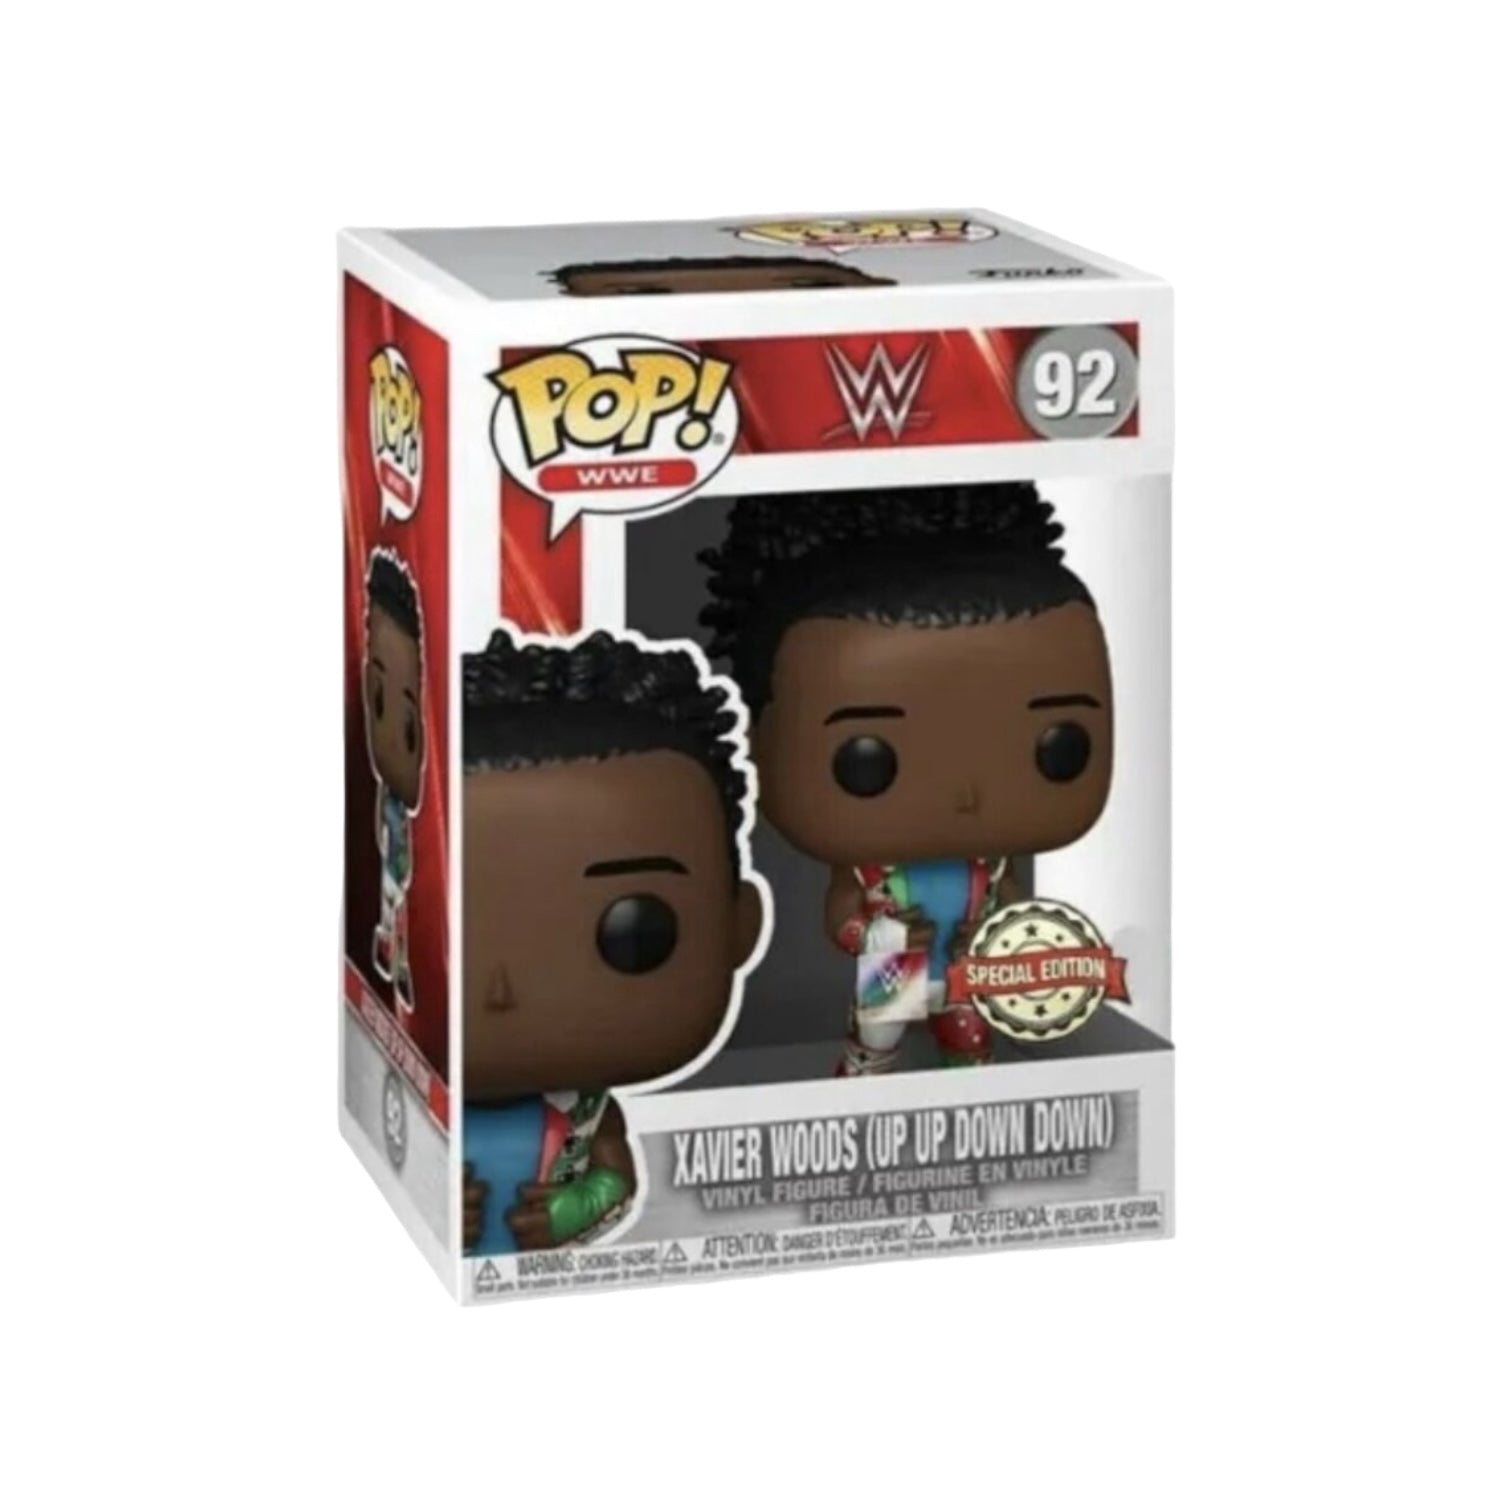 Xavier Woods (Up Up Down Down) #92 Funko Pop! - WWE - Special Edition